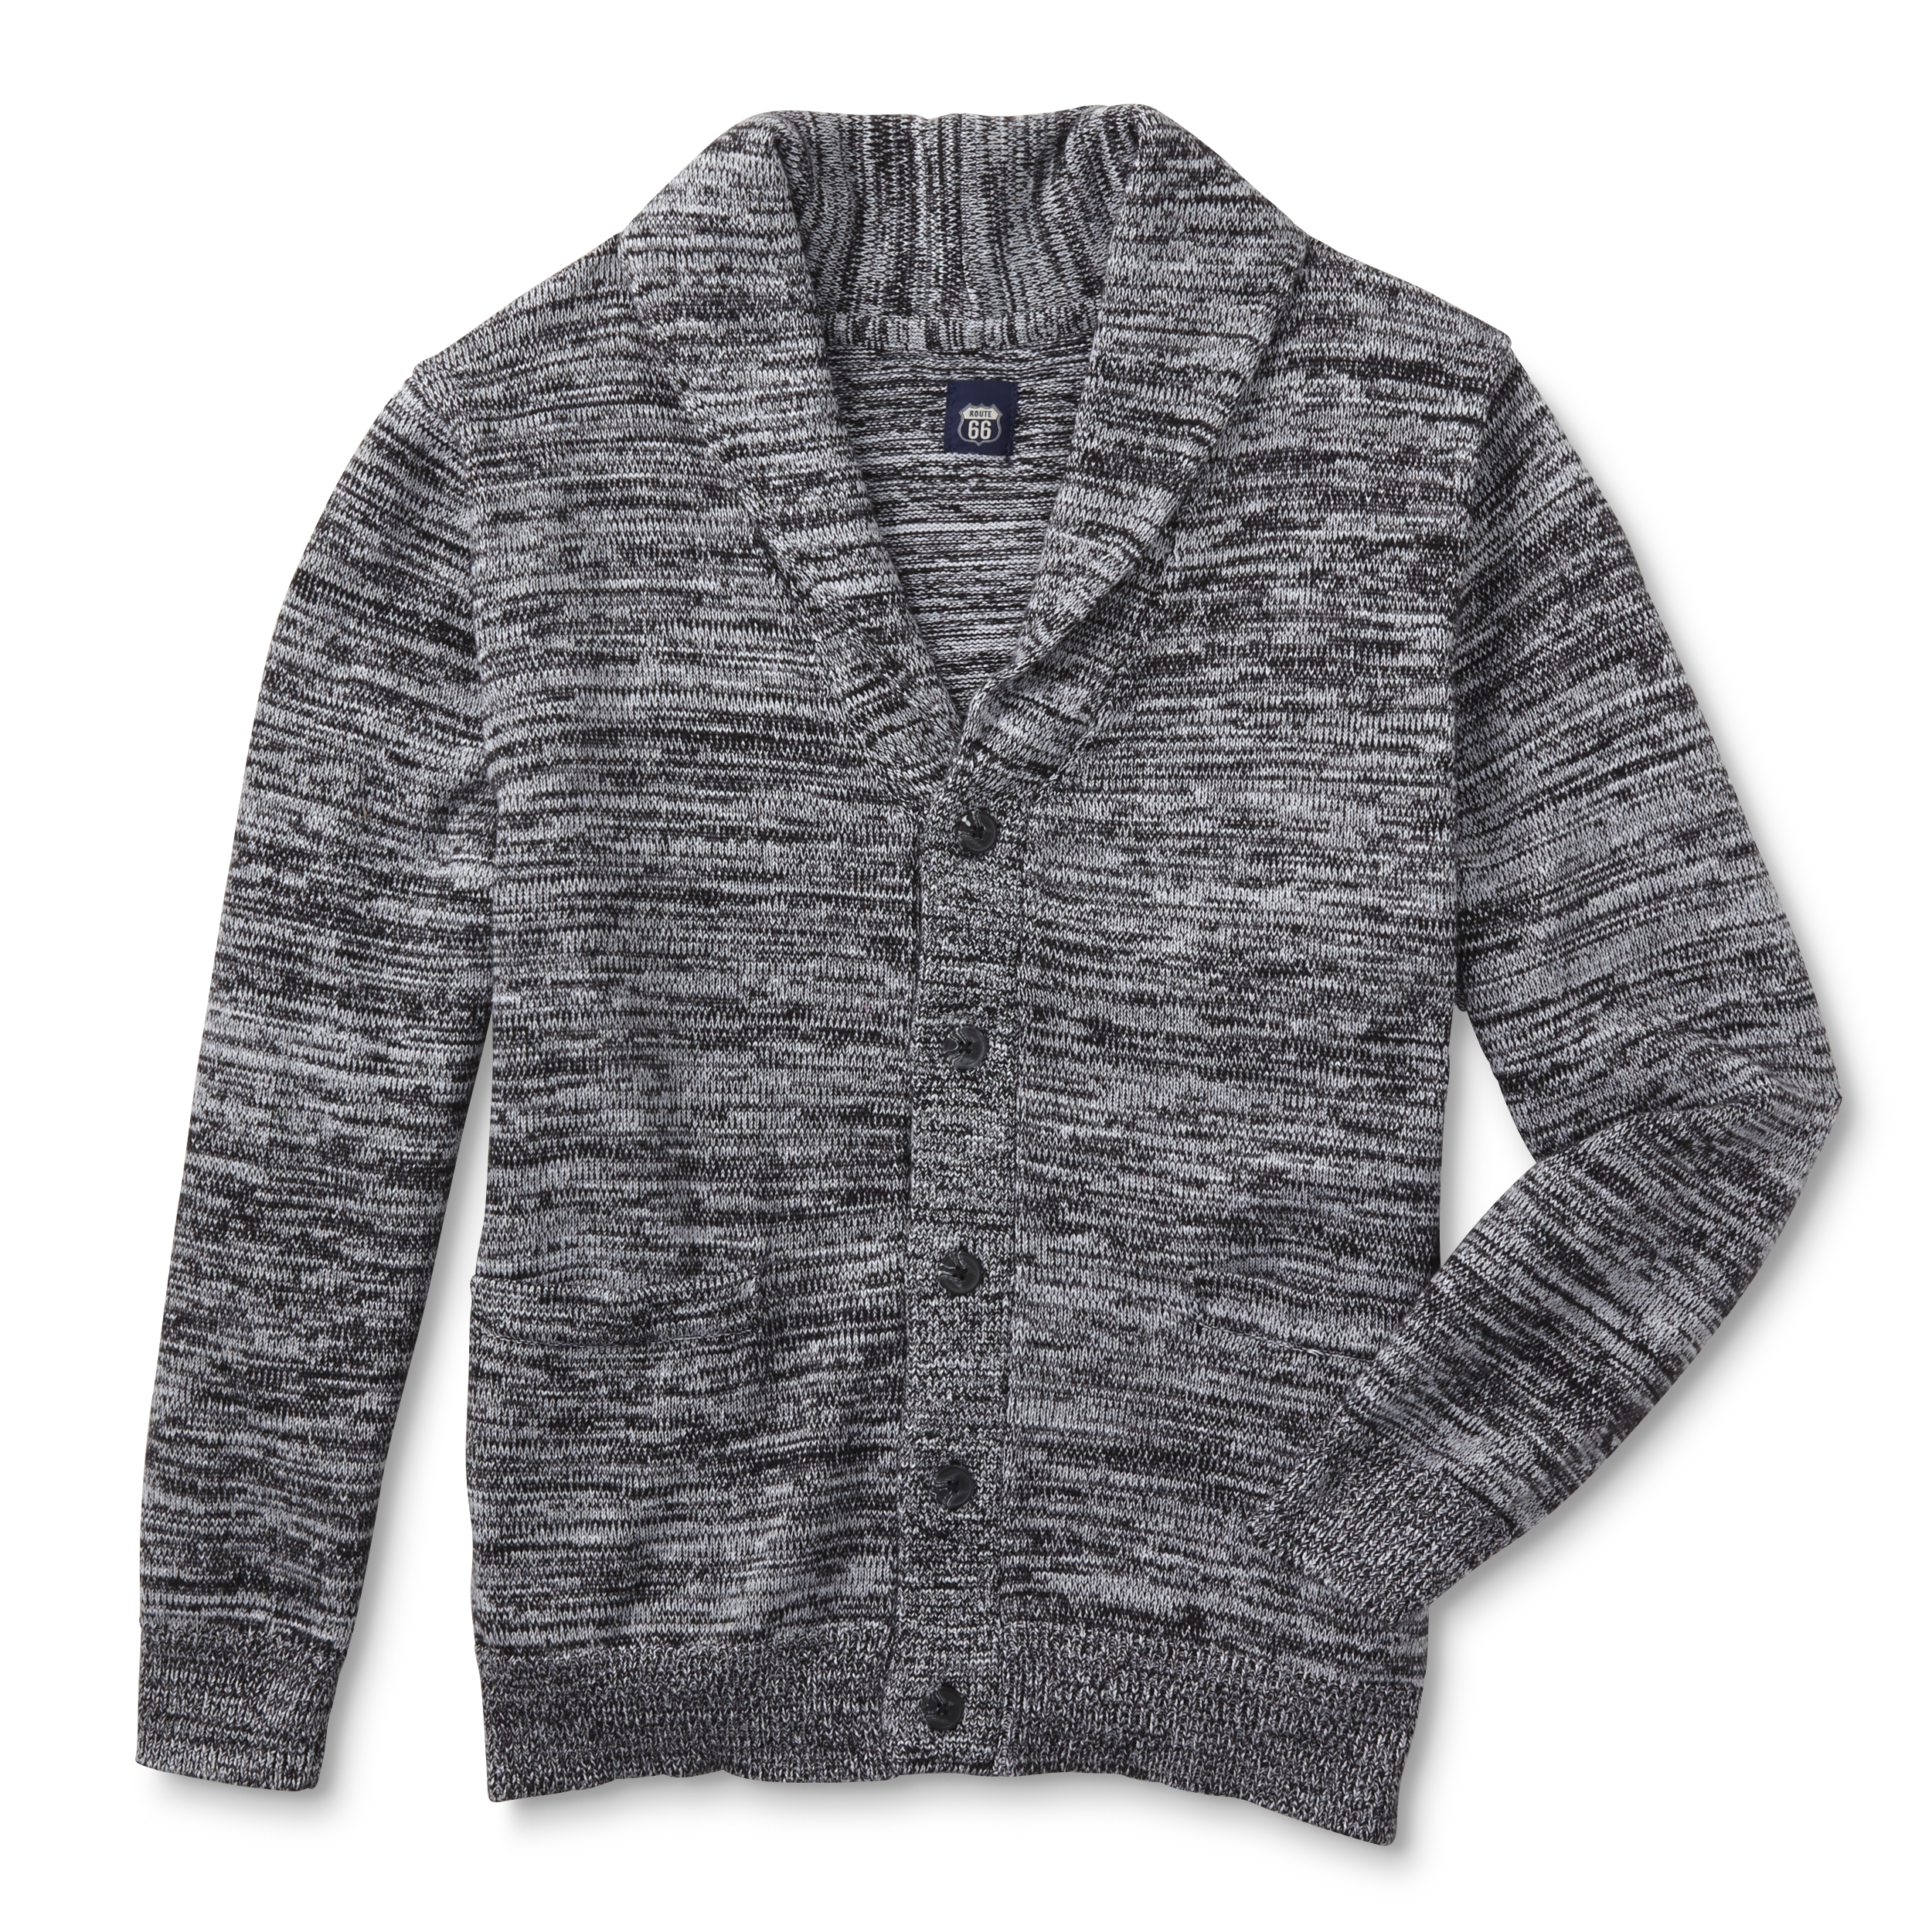 Route 66 Men's Shawl Collar Cardigan - Space-Dyed